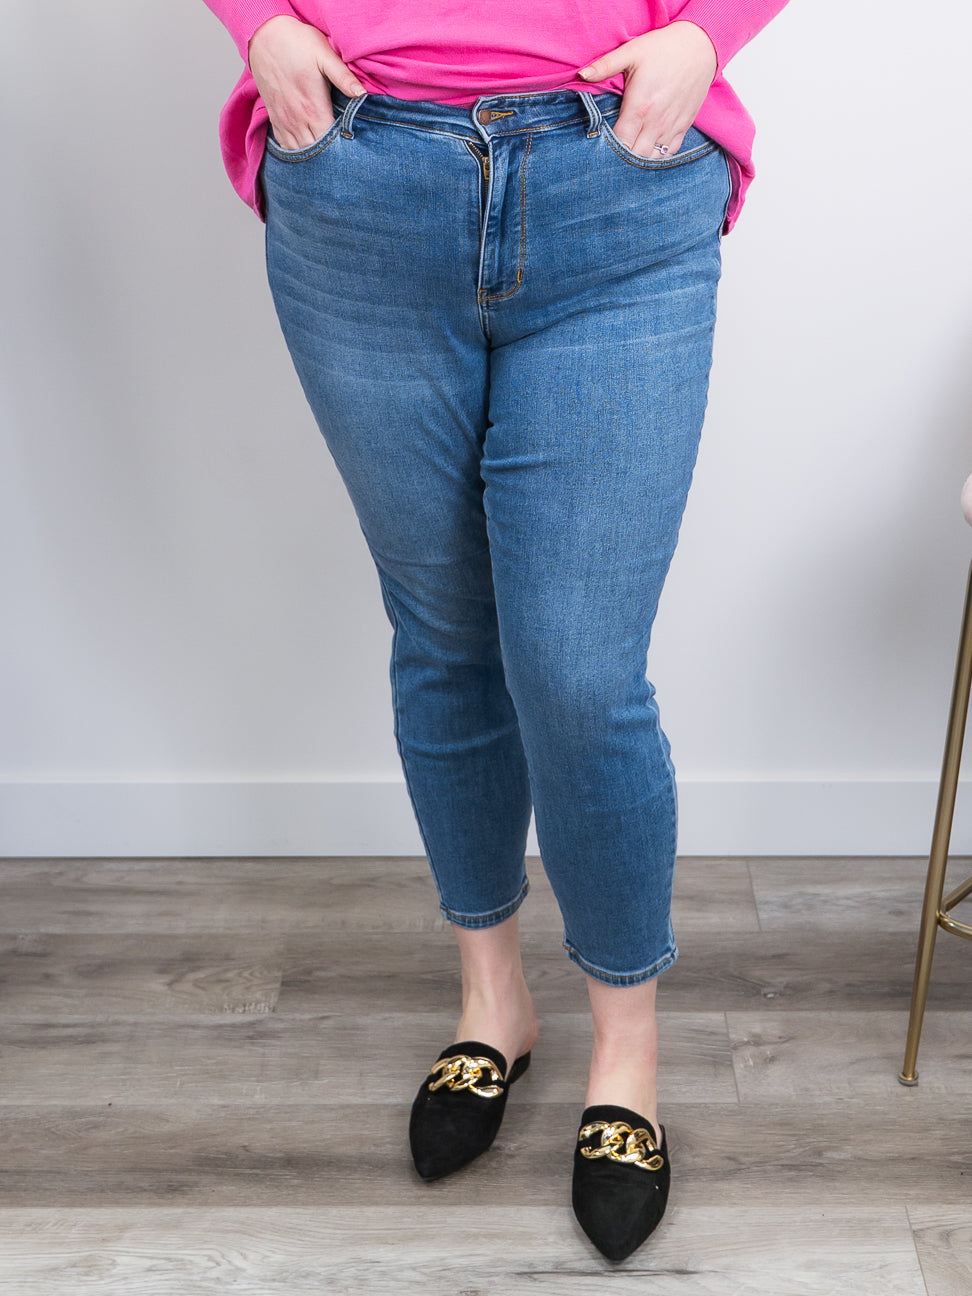 Boohoo Plus high waisted mom jeans in mid wash blue